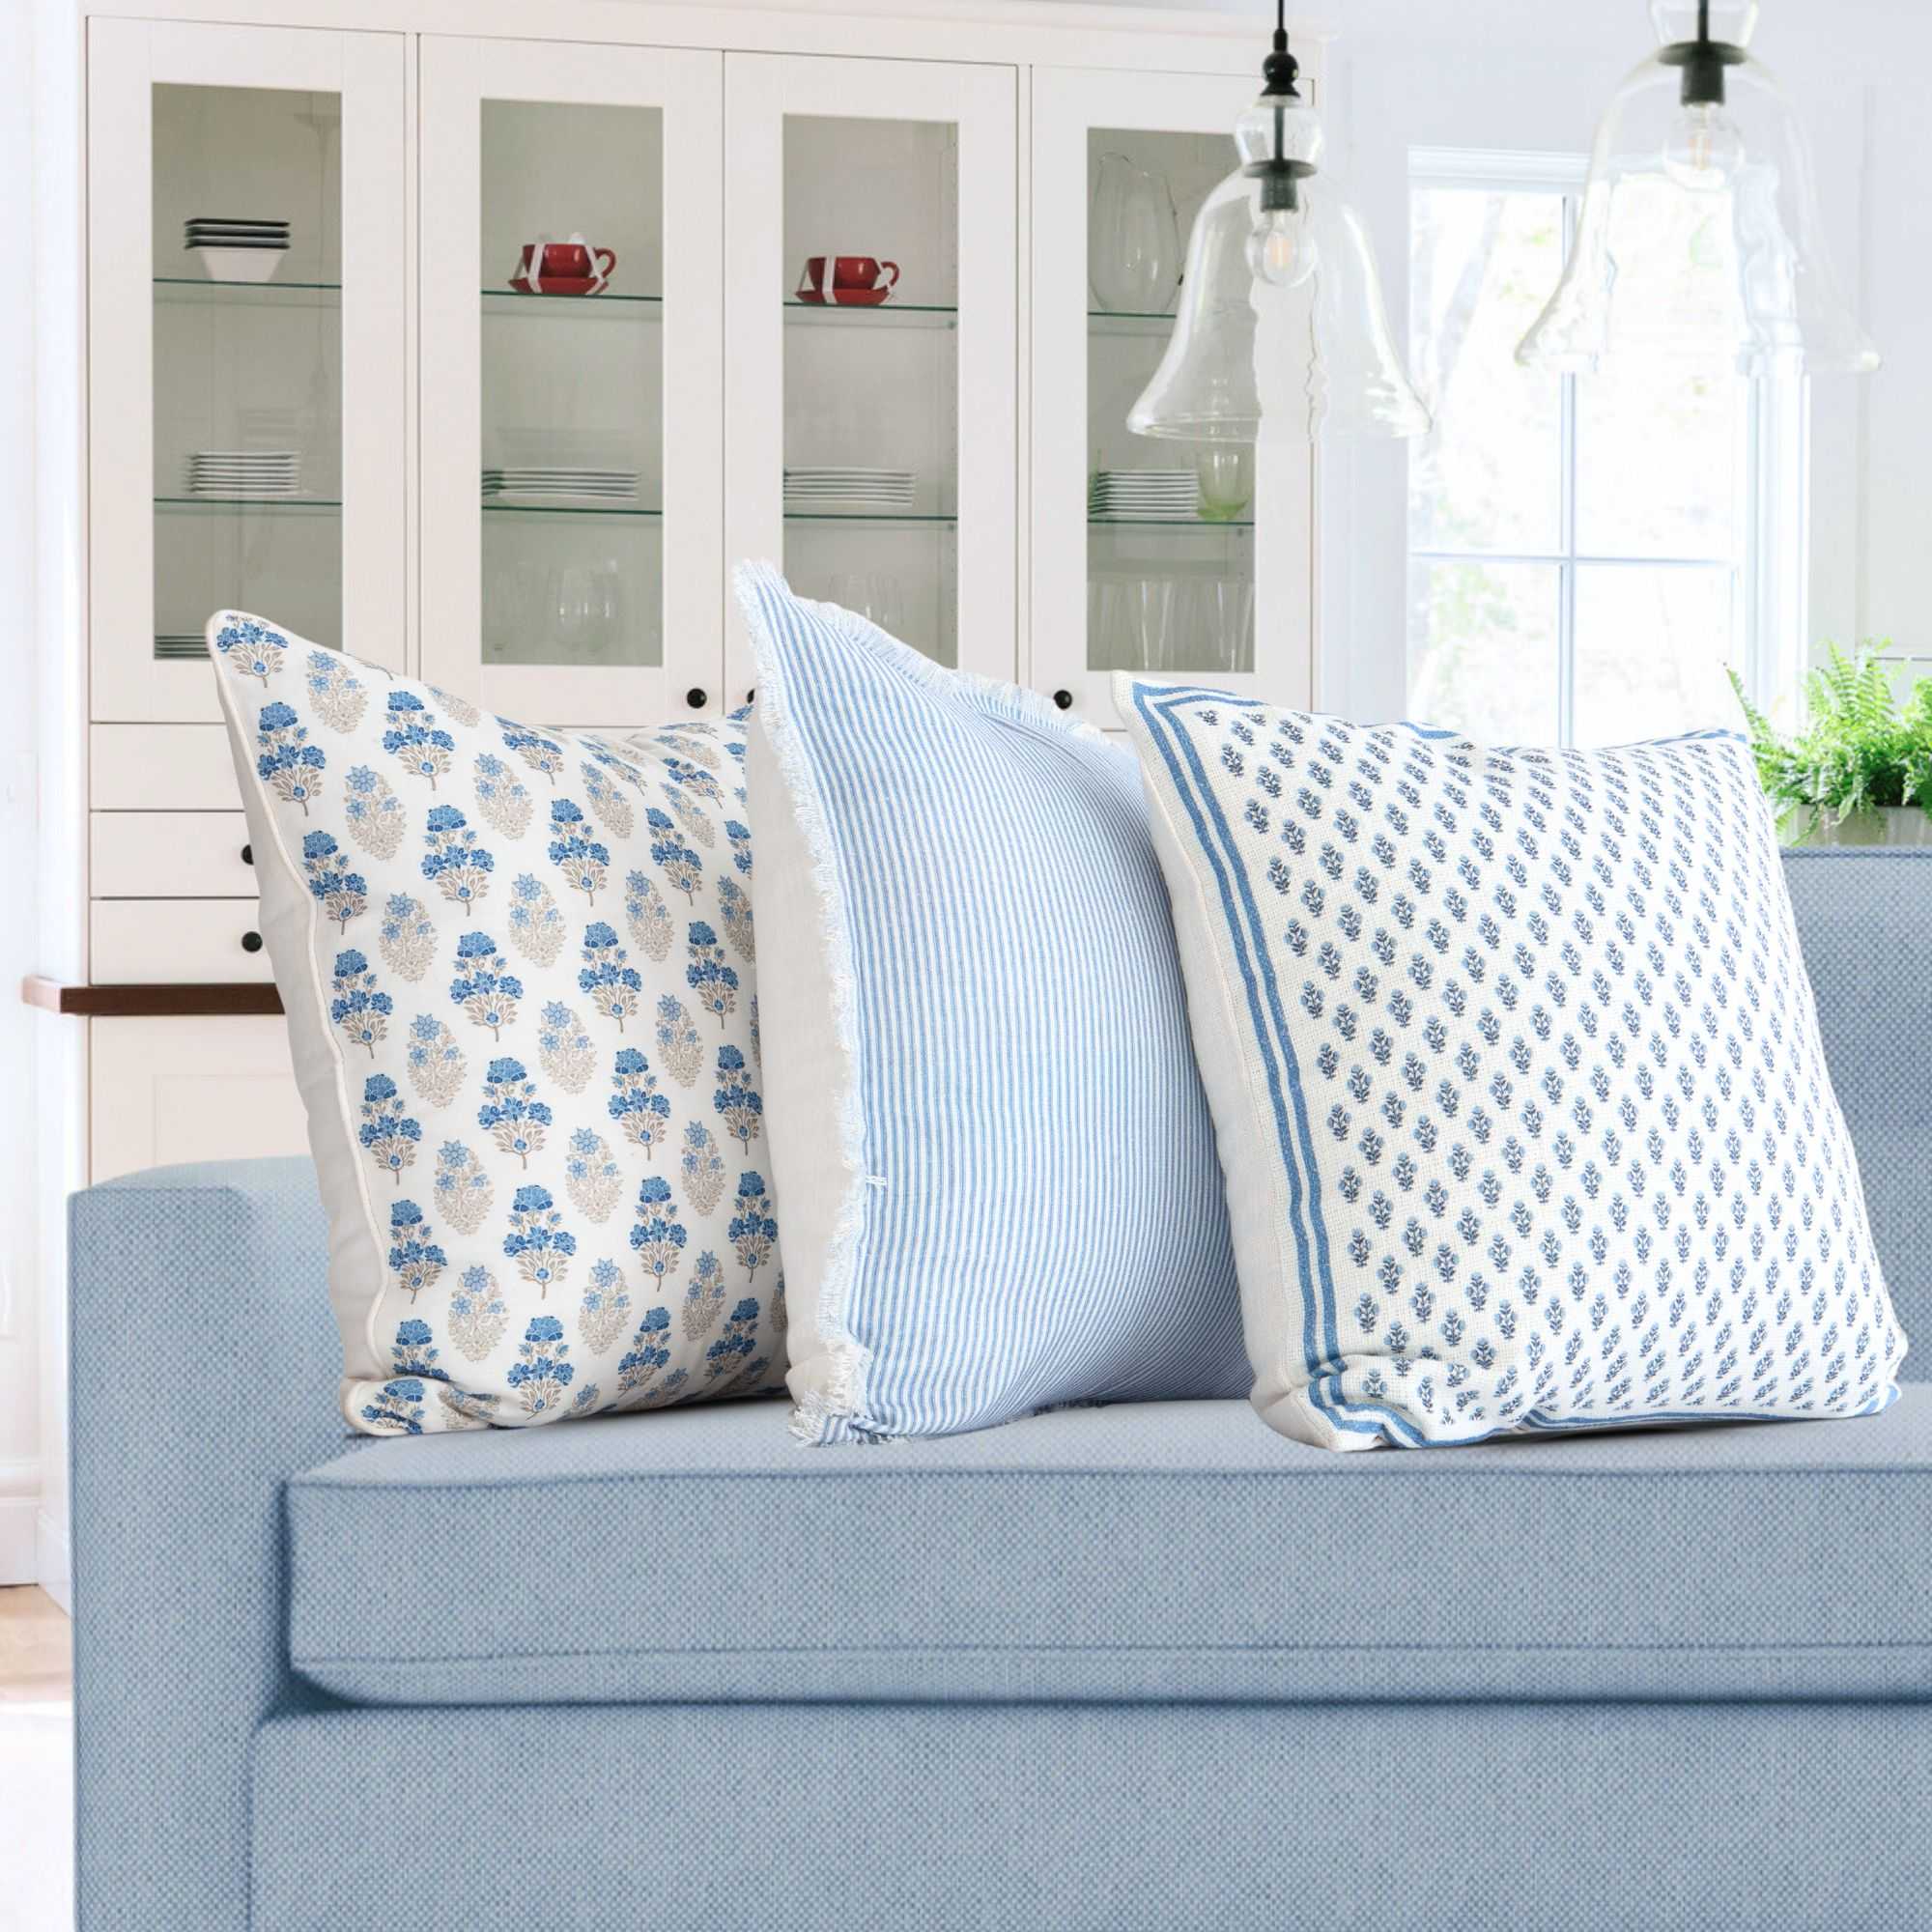 decorative pillows and throws